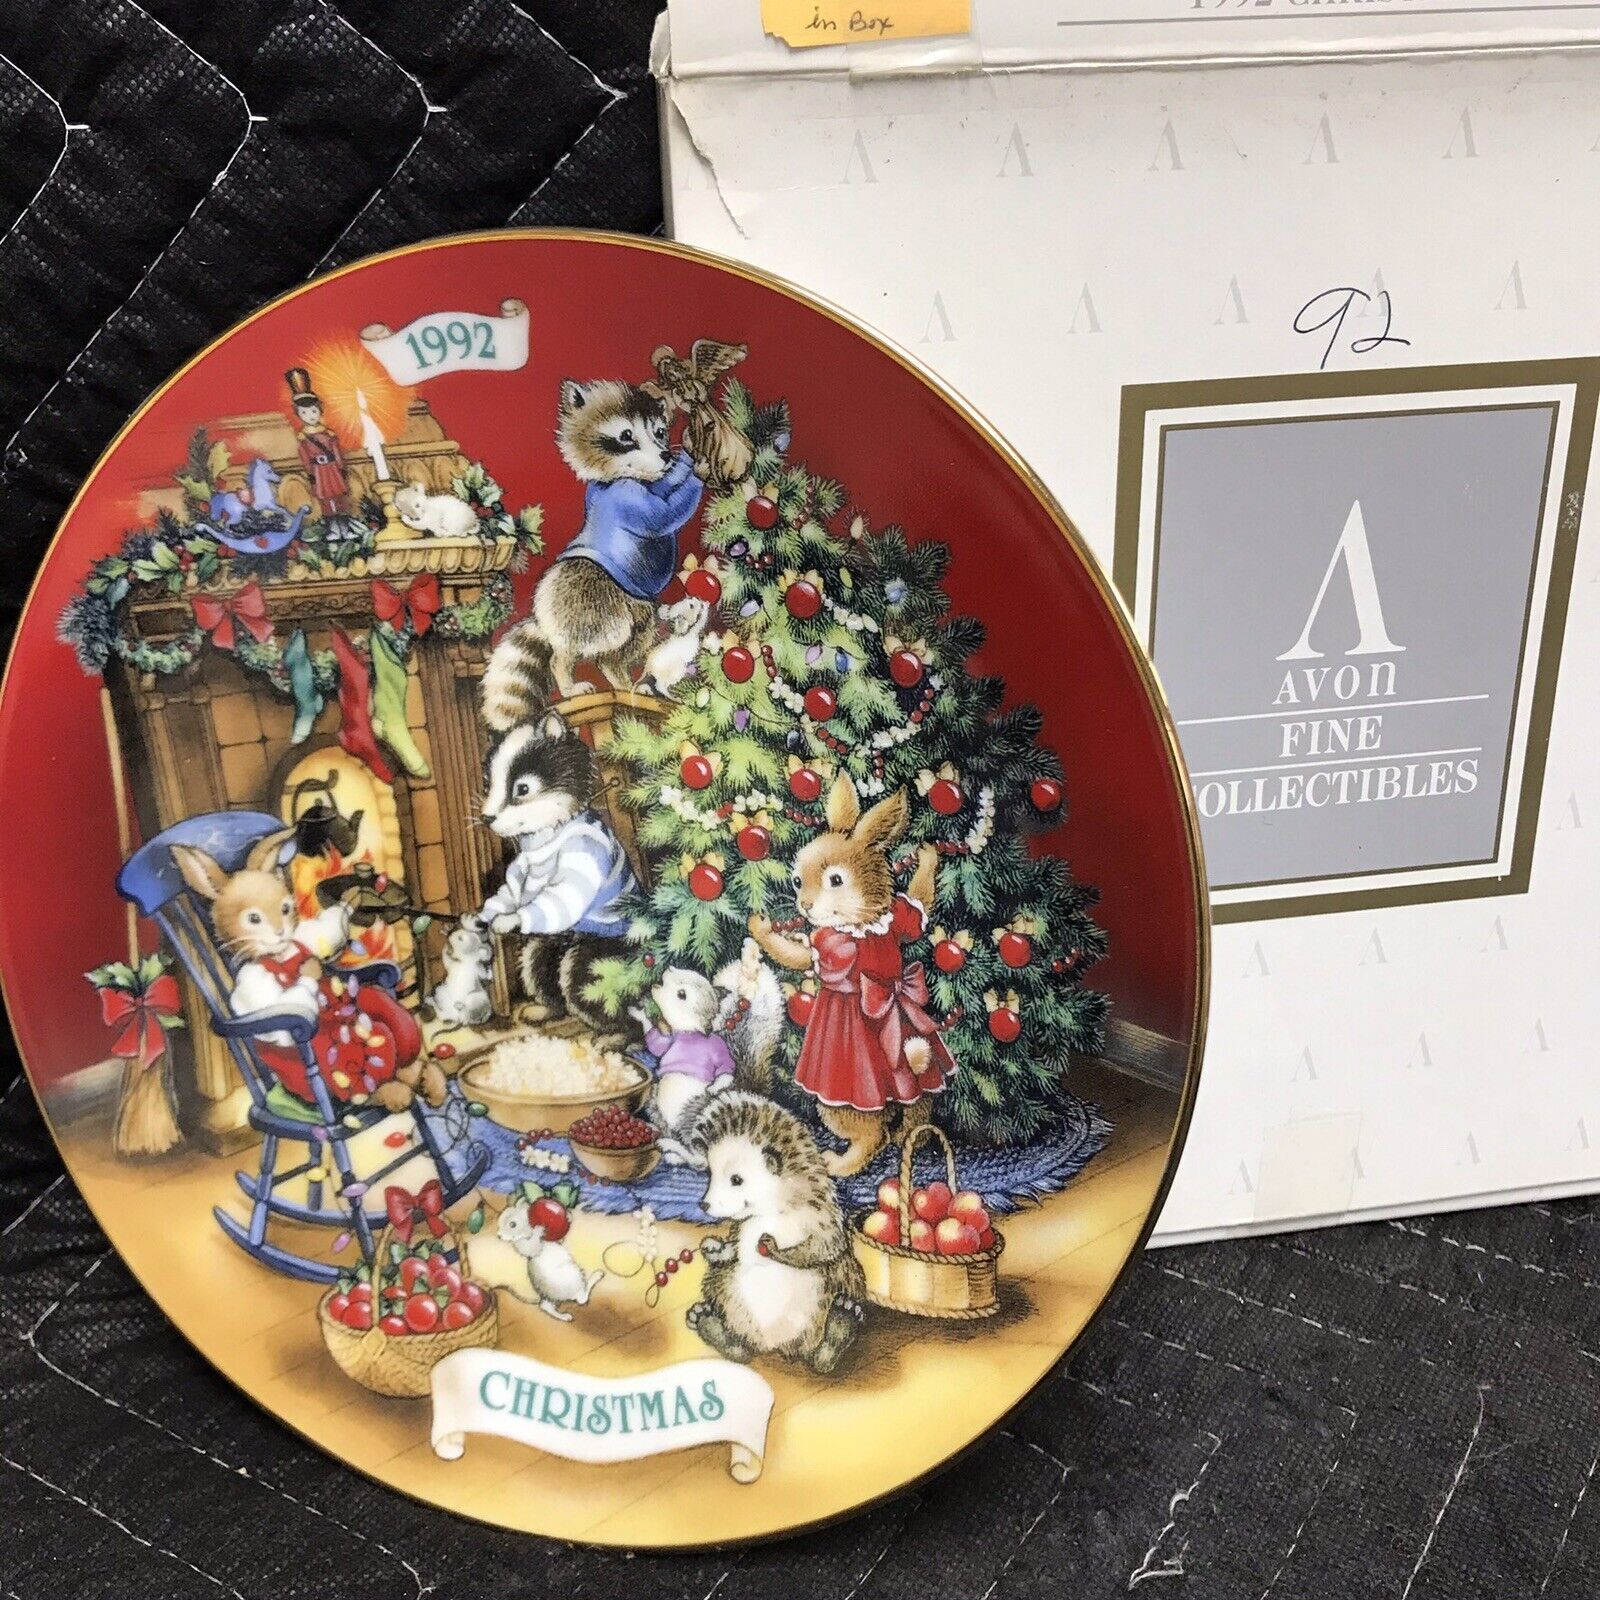 Primary image for Avon Collectible Christmas Plate 1992 Sharing Christmas With Friends Excellent